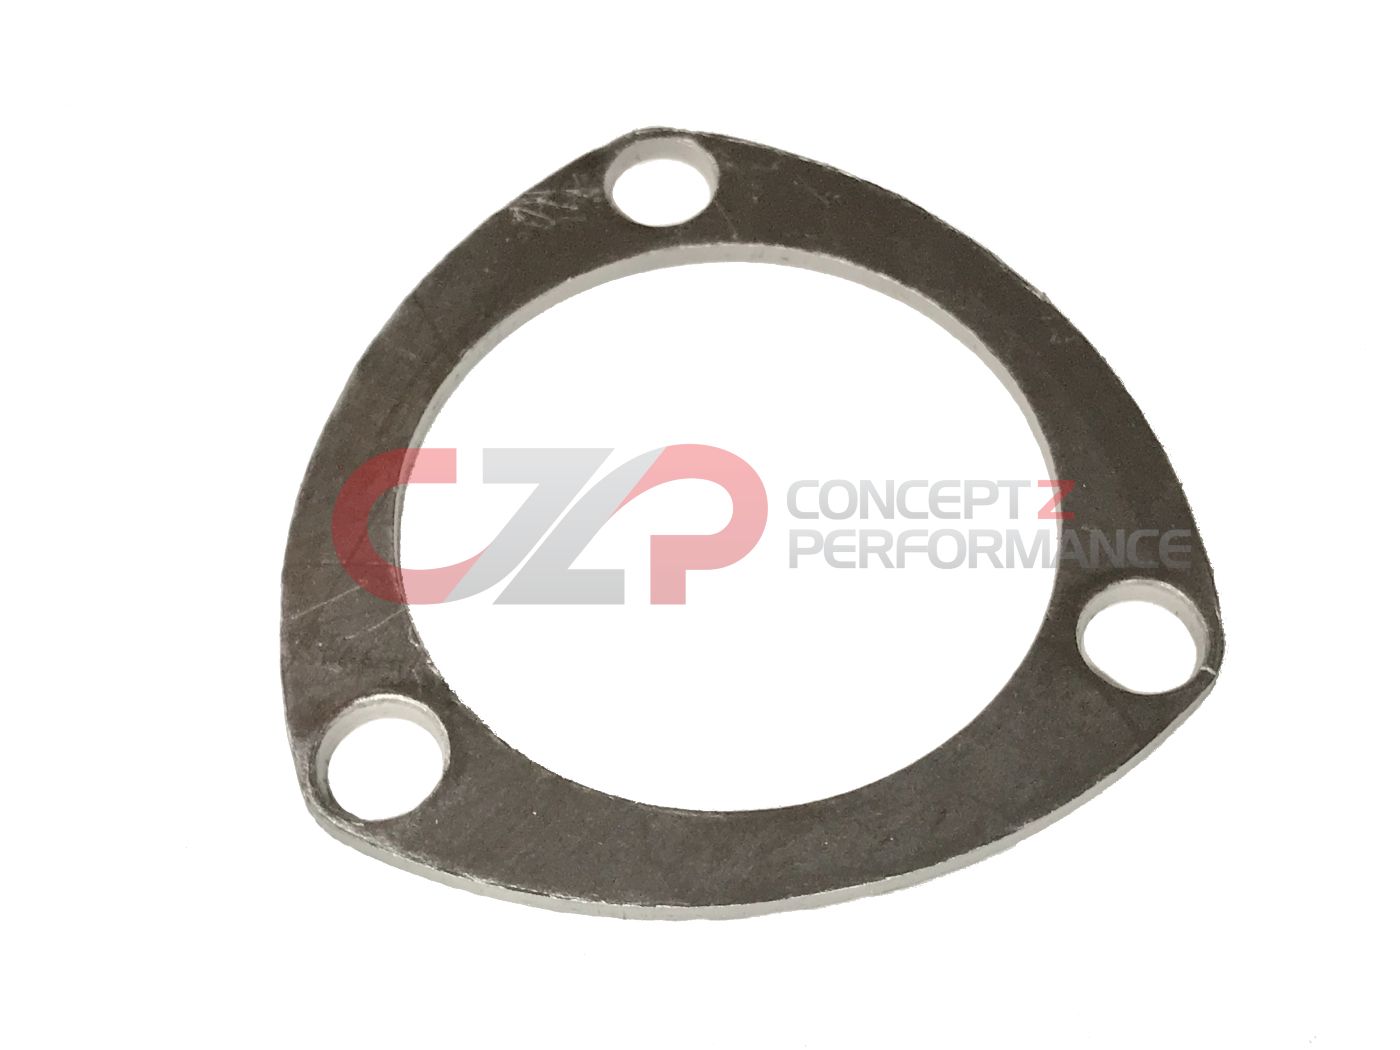 CZP XT eXtra Thick 3 Bolt 3" ID Exhaust Gasket